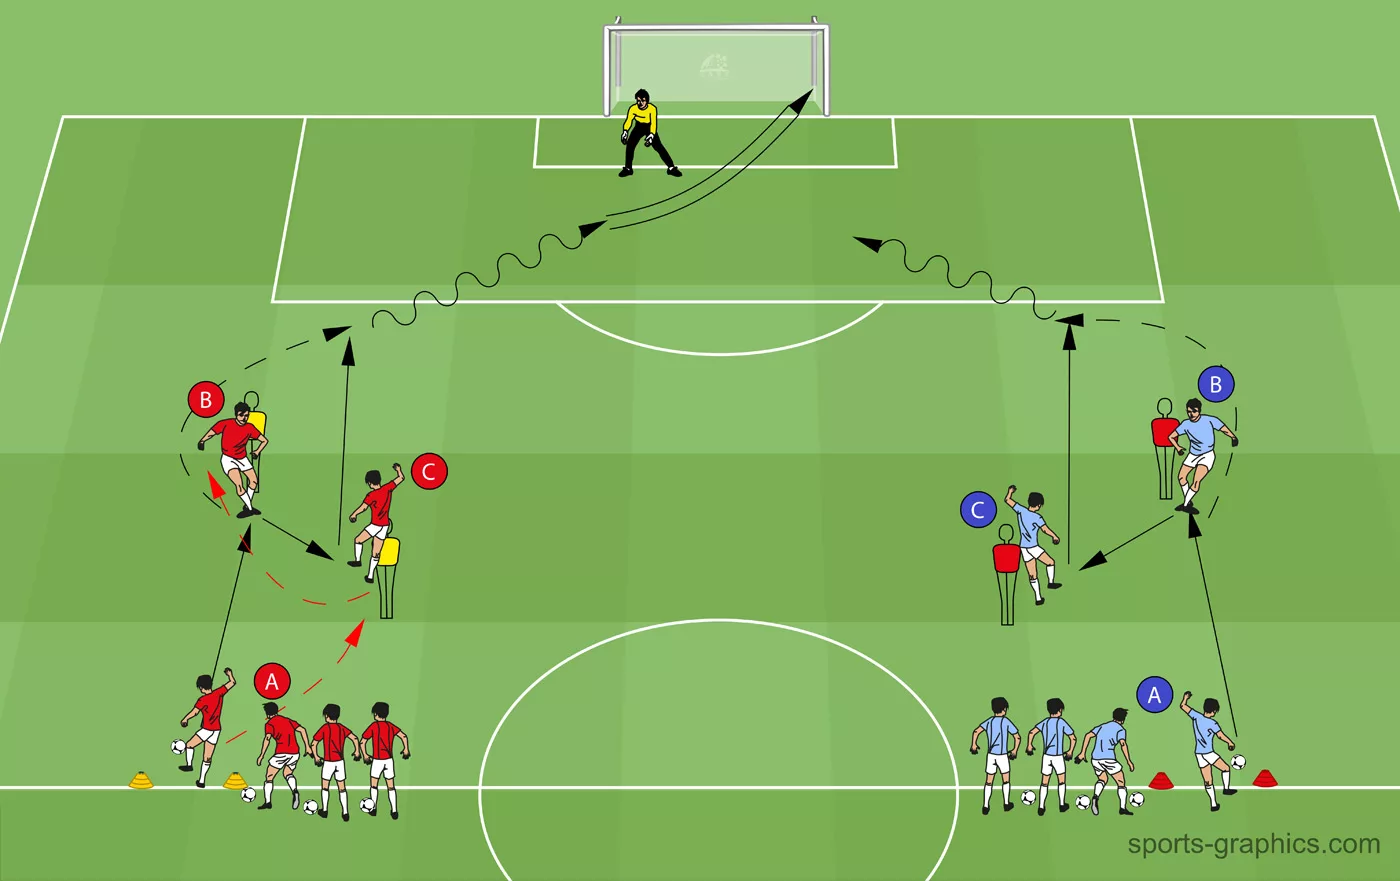 Shooting Drill after a ‘through-, drop-, and through-pass’ sequence